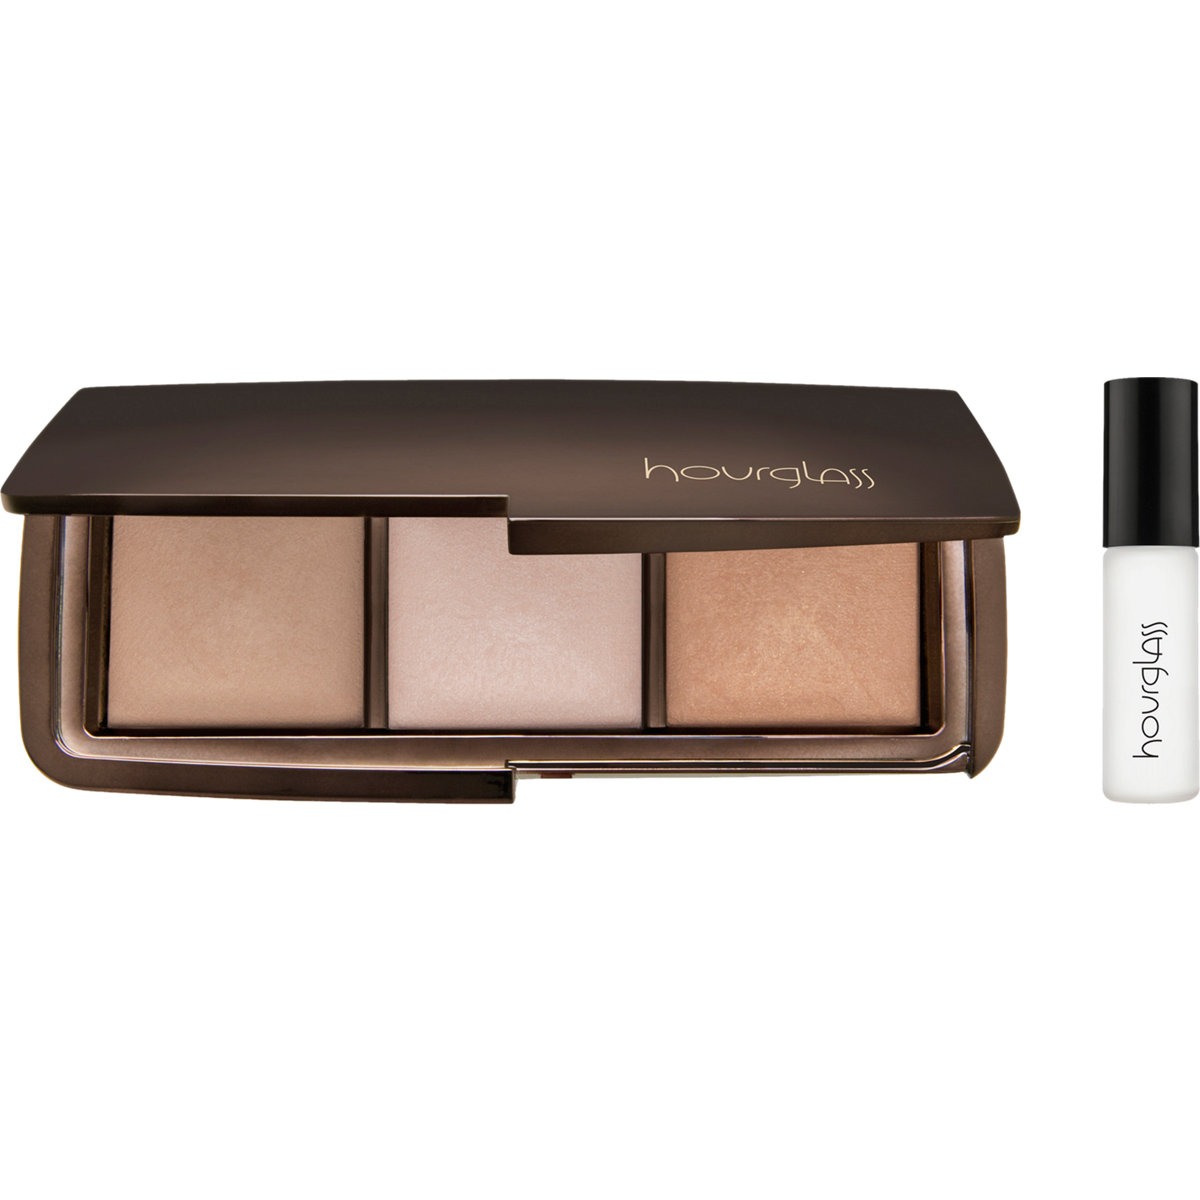 Hourglass Ambient Powder Palette Review – StyleCaster